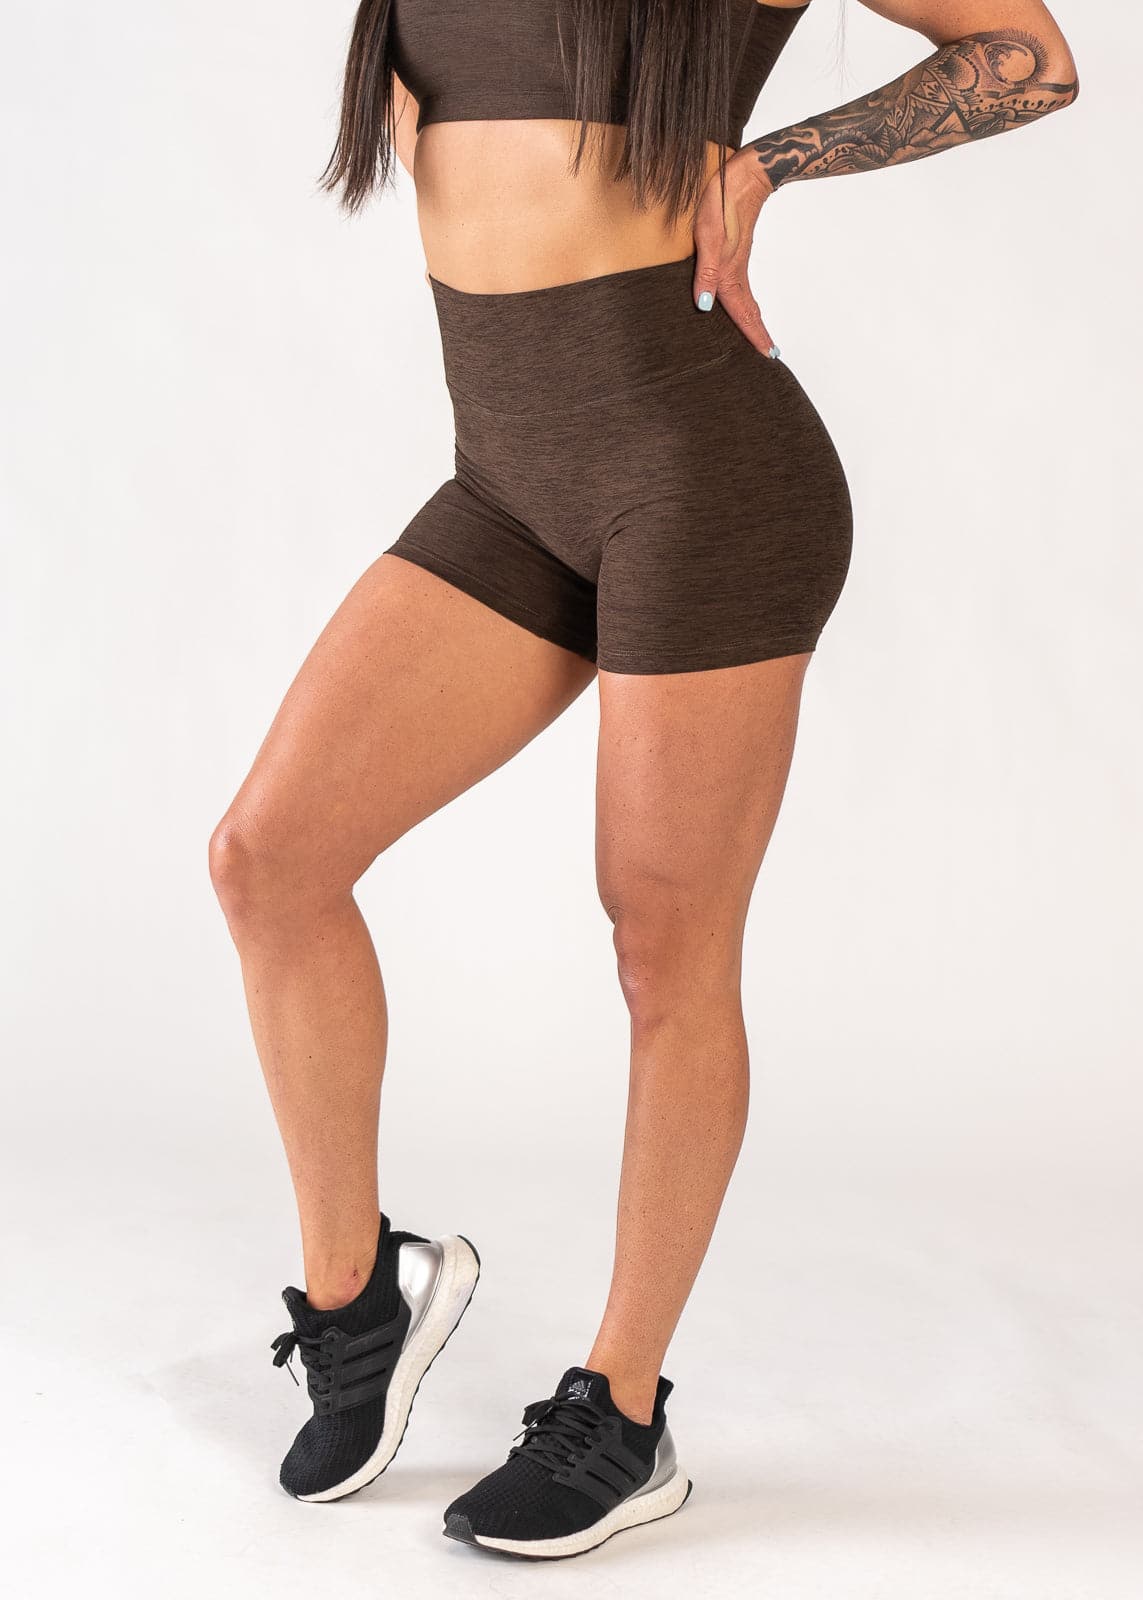 Chest Down 3/4 Side View One Leg Up Wearing Dream 4" Shorts | Cocoa